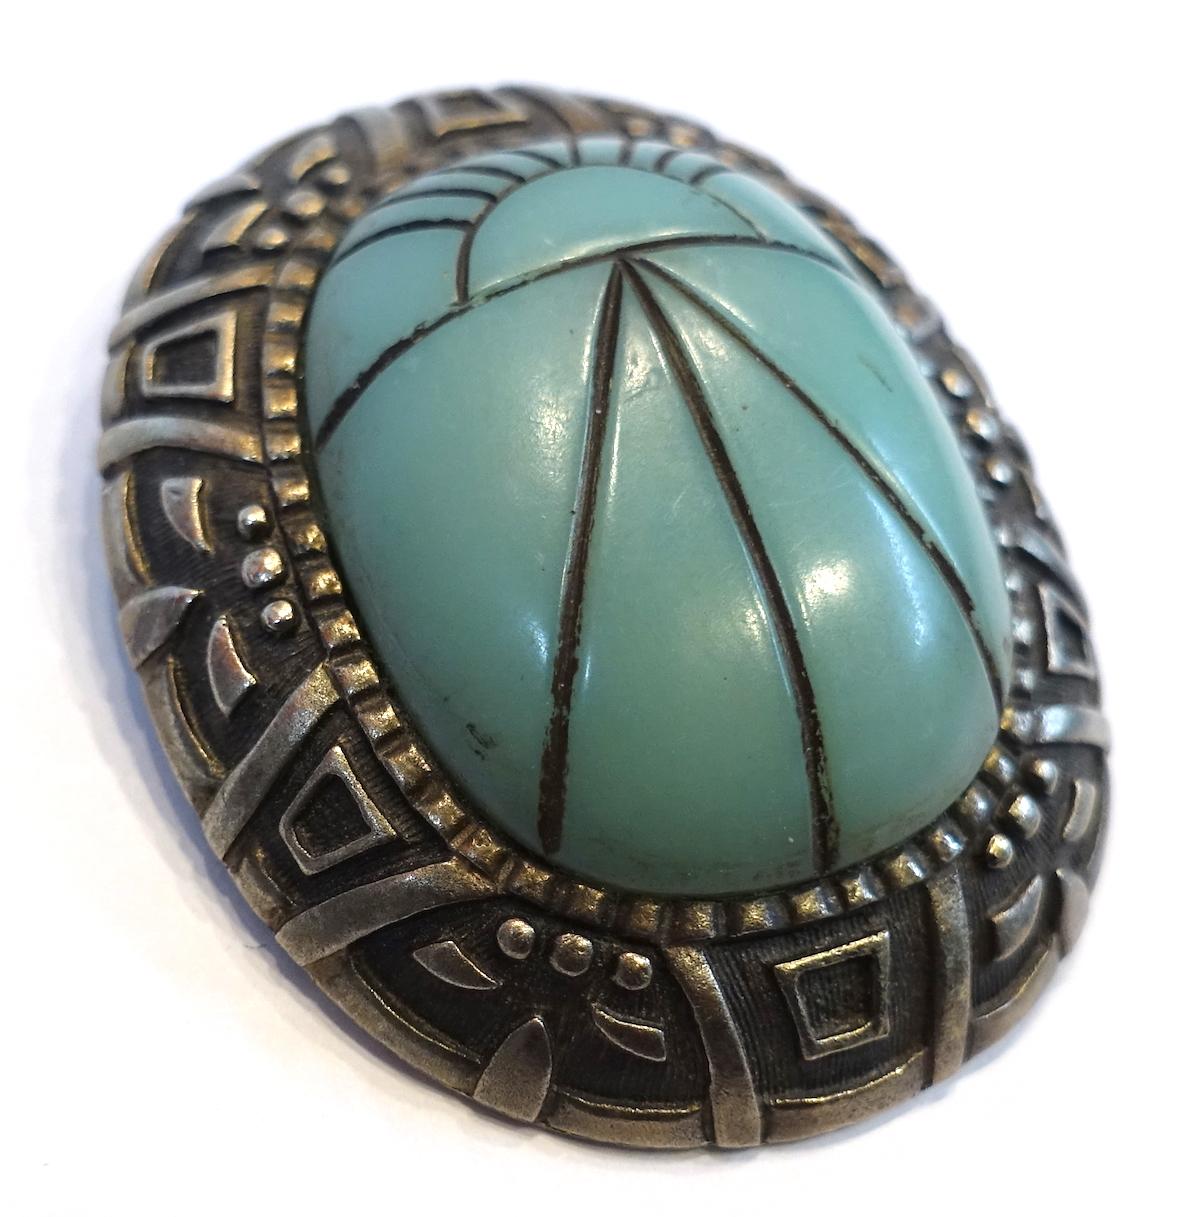 This vintage signed Hobe brooch-pendant features a carved faux turquoise stone in a sterling silver setting.  It can be worn as a brooch or a pendant.  It measures 2-1/4” x 1-7/8” and is signed “Hobe”. This piece is in excellent condition.